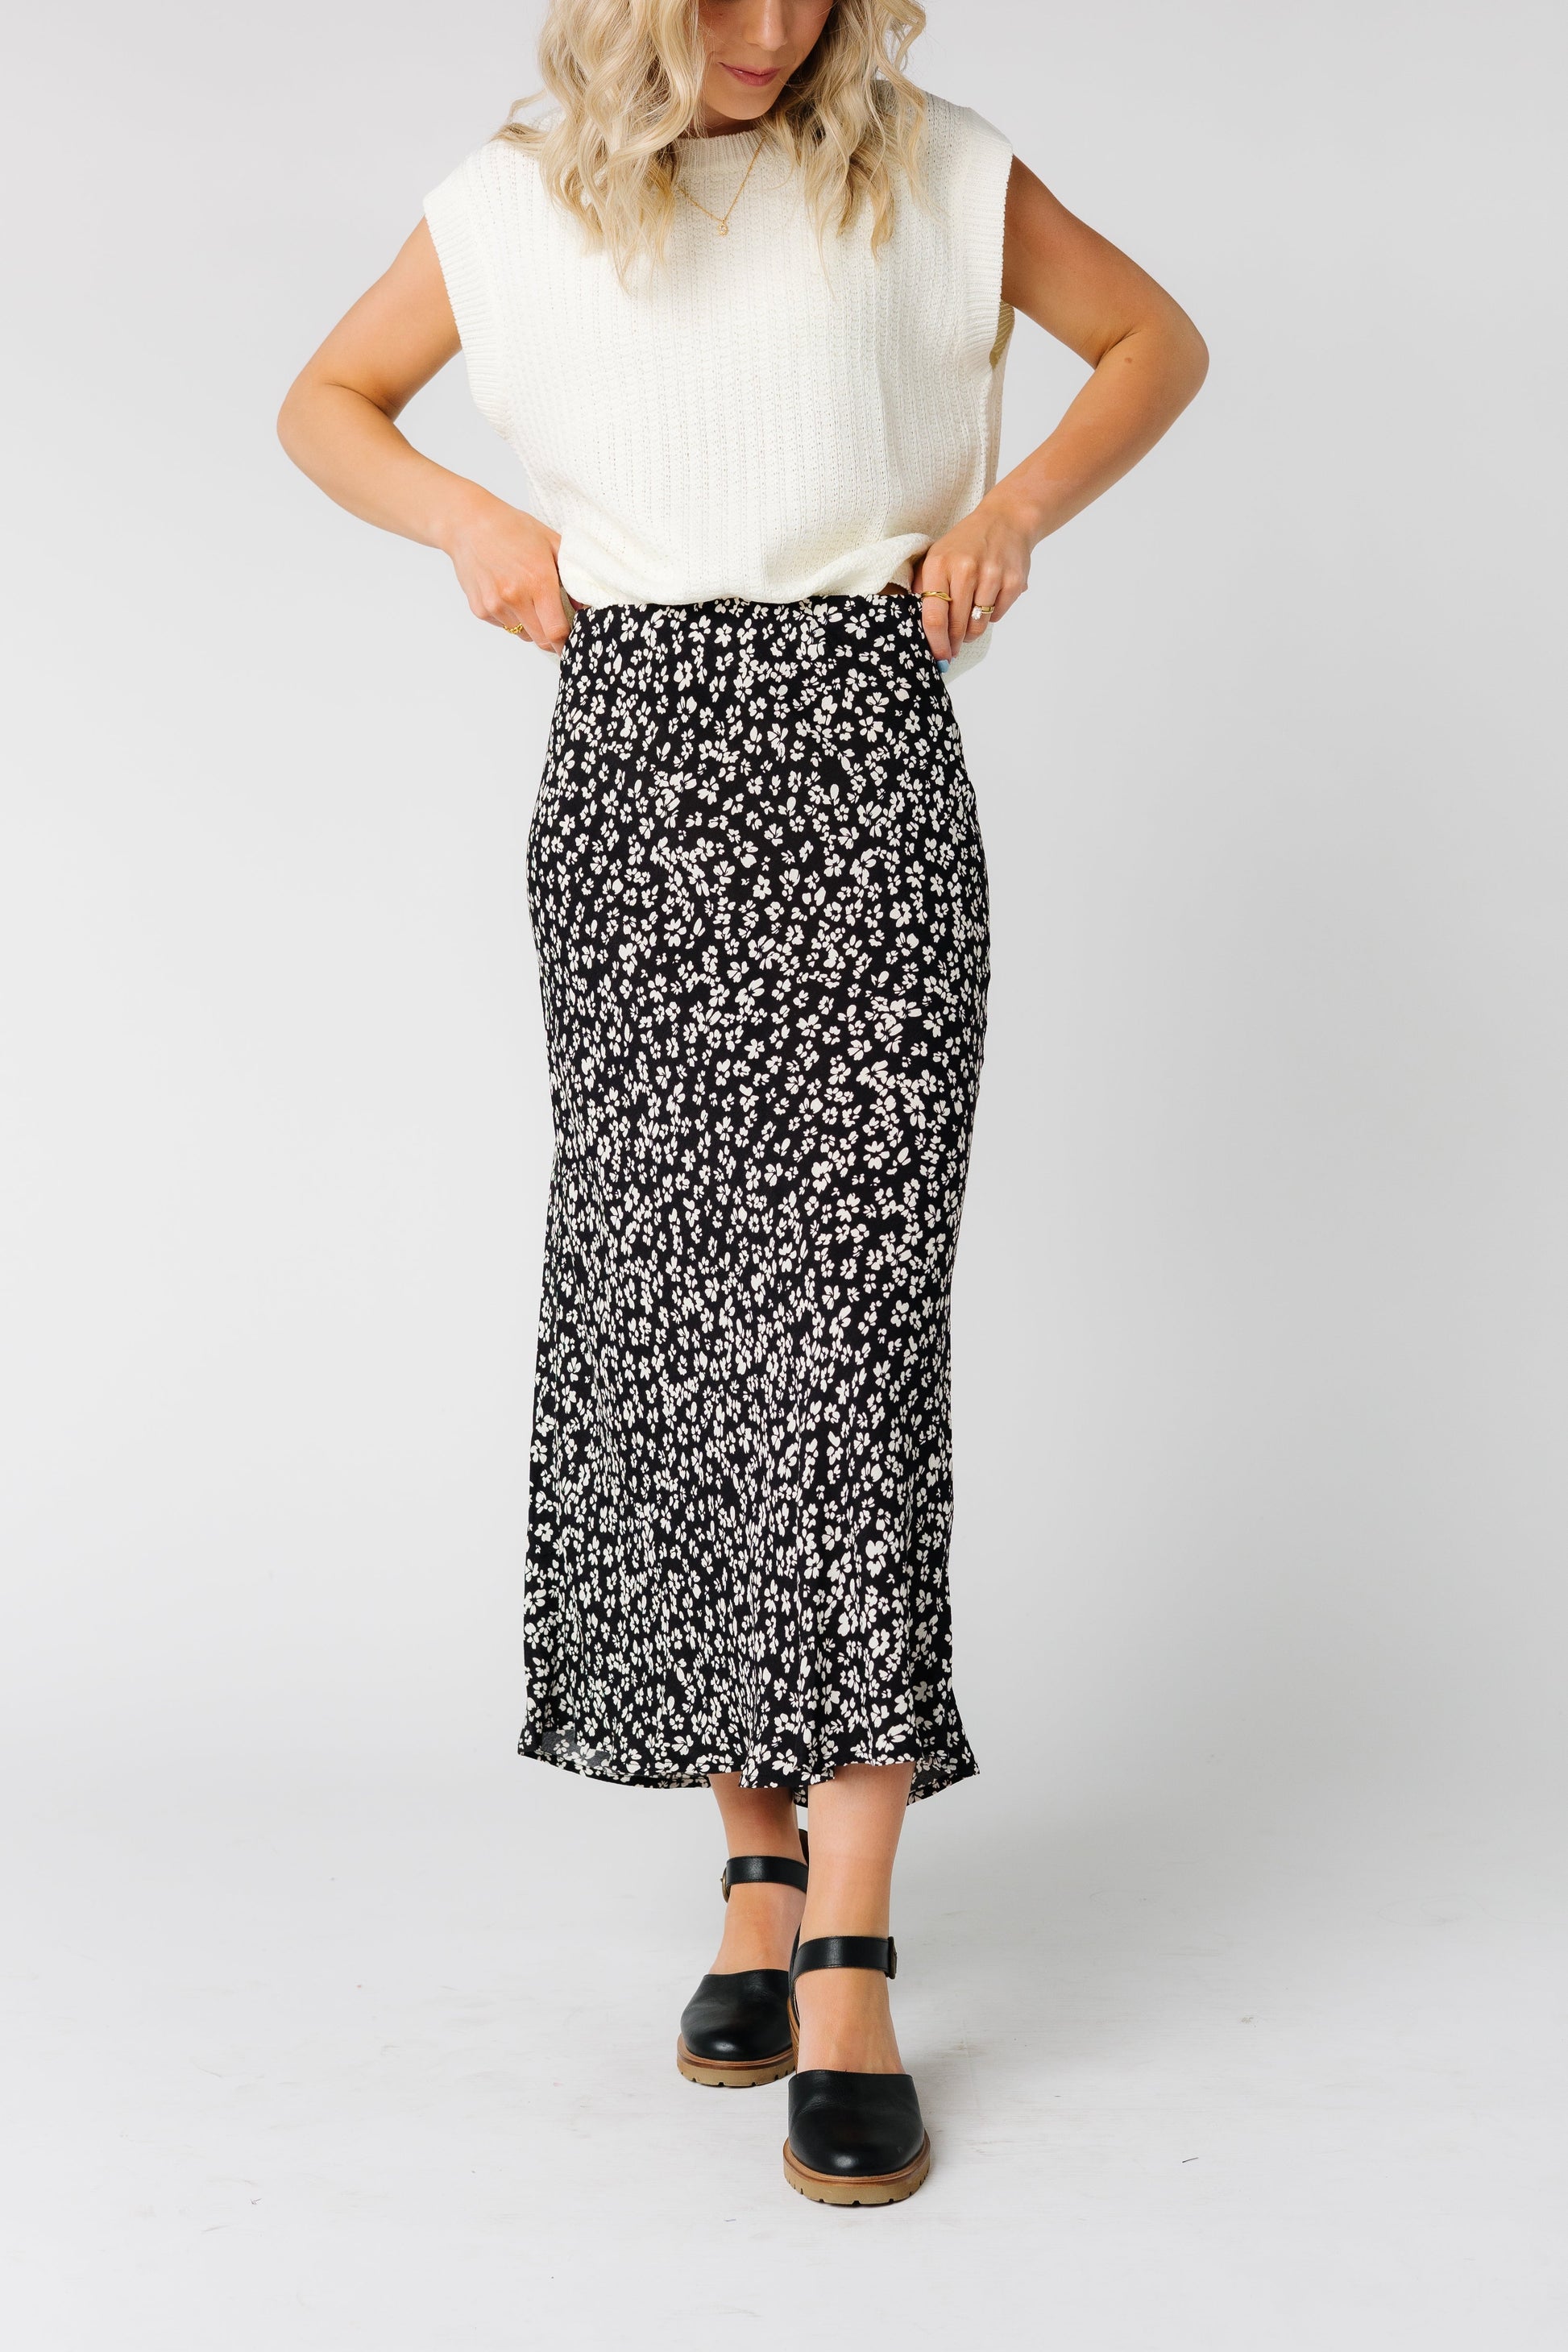 The Jackie Skirt WOMEN'S SKIRTS Be Cool 